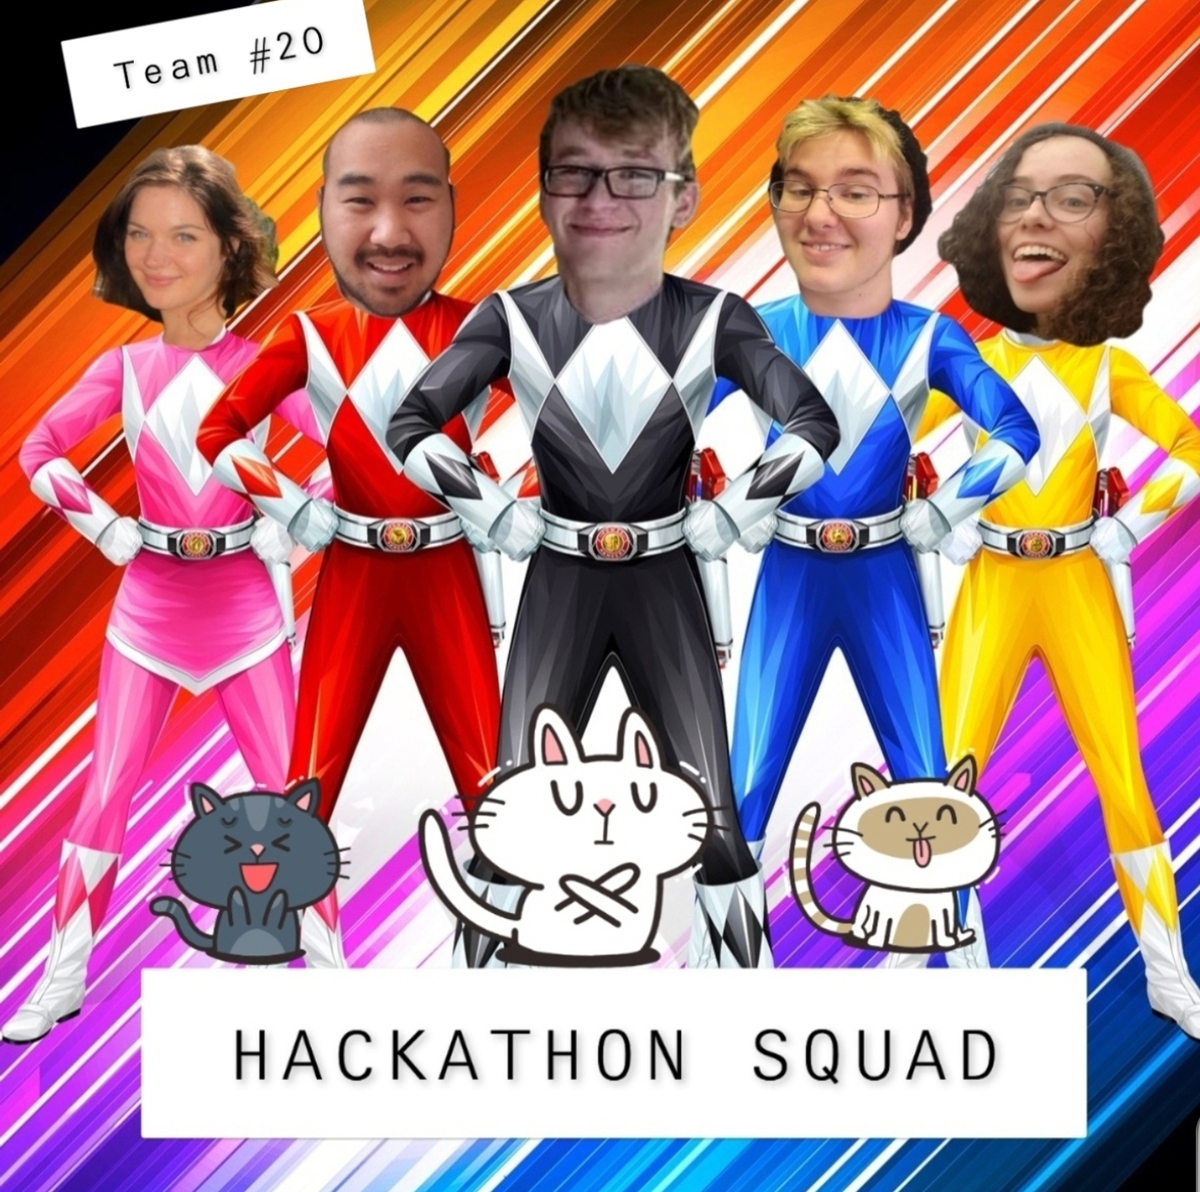 Team #20 received the Hacker’s Choice Award, selected by participants and visitors. In addition to their super heroes graphic, members Marie McCord, left, Alex Silavong, Gage Richardson, Biz Duff and Erica Truxton also had a creative entry — “Are You Kitten Me: a Purr-ference Quiz” — during the 36-hour HackMT event, held virtually Jan. 29-31 because of the COVID-19 pandemic.(Submitted graphic by Alex Silavong)